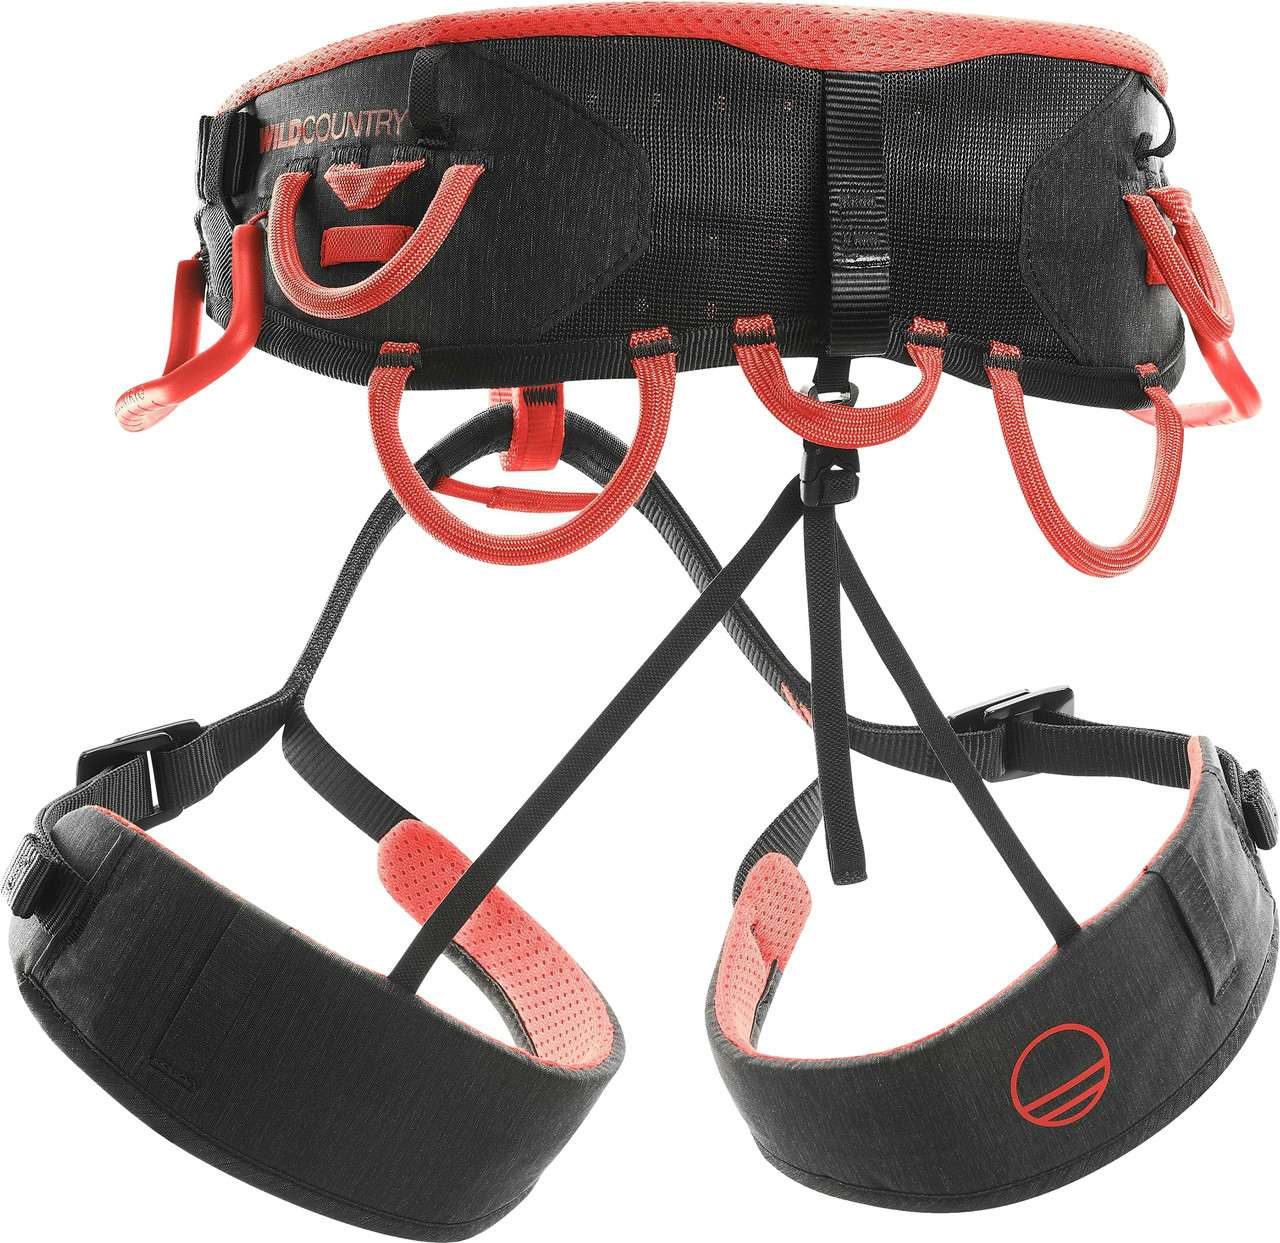 Syncro Harness Black/Red